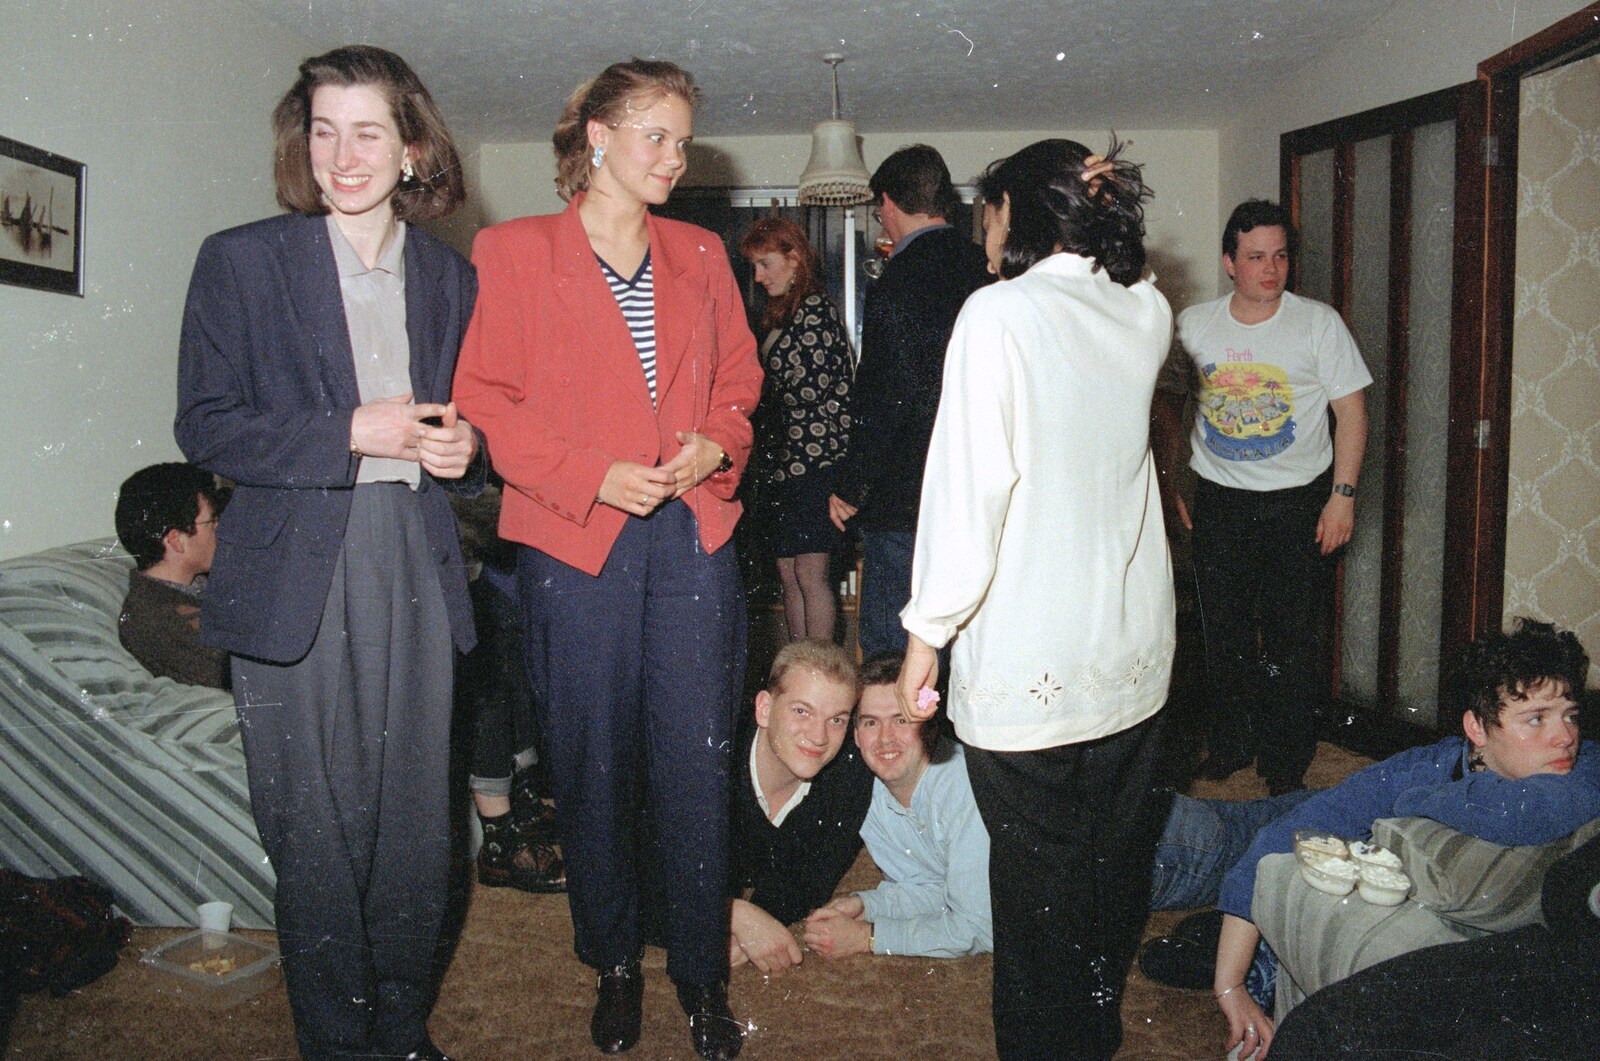 Hamish's Oxford Party, Oxfordshire - 25th April 1992: Party crowd